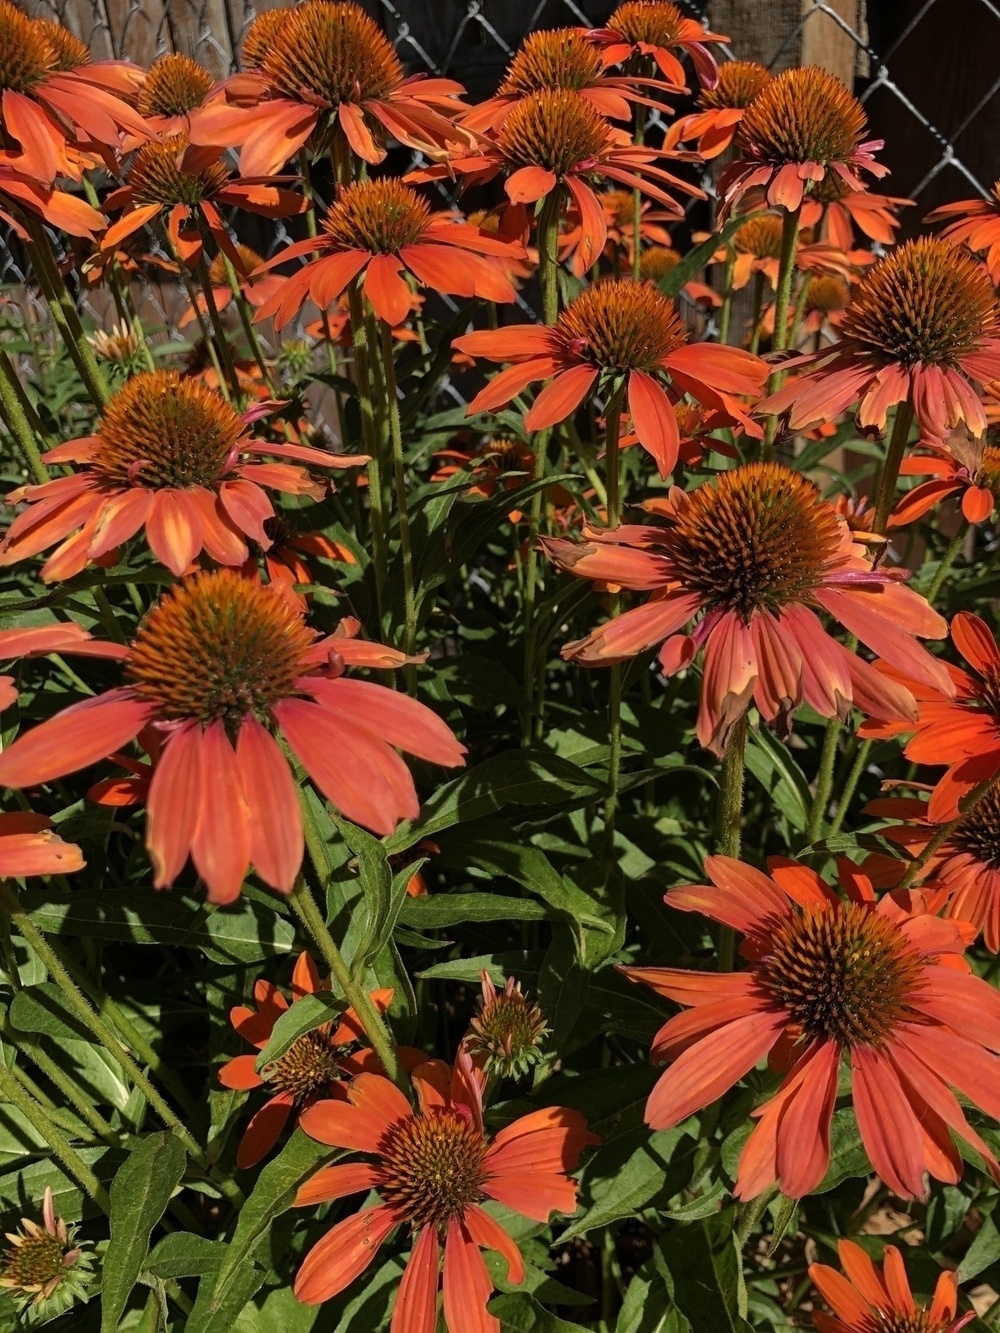 An exuberant orange echinacea in bloom with many full and open bloom heads.